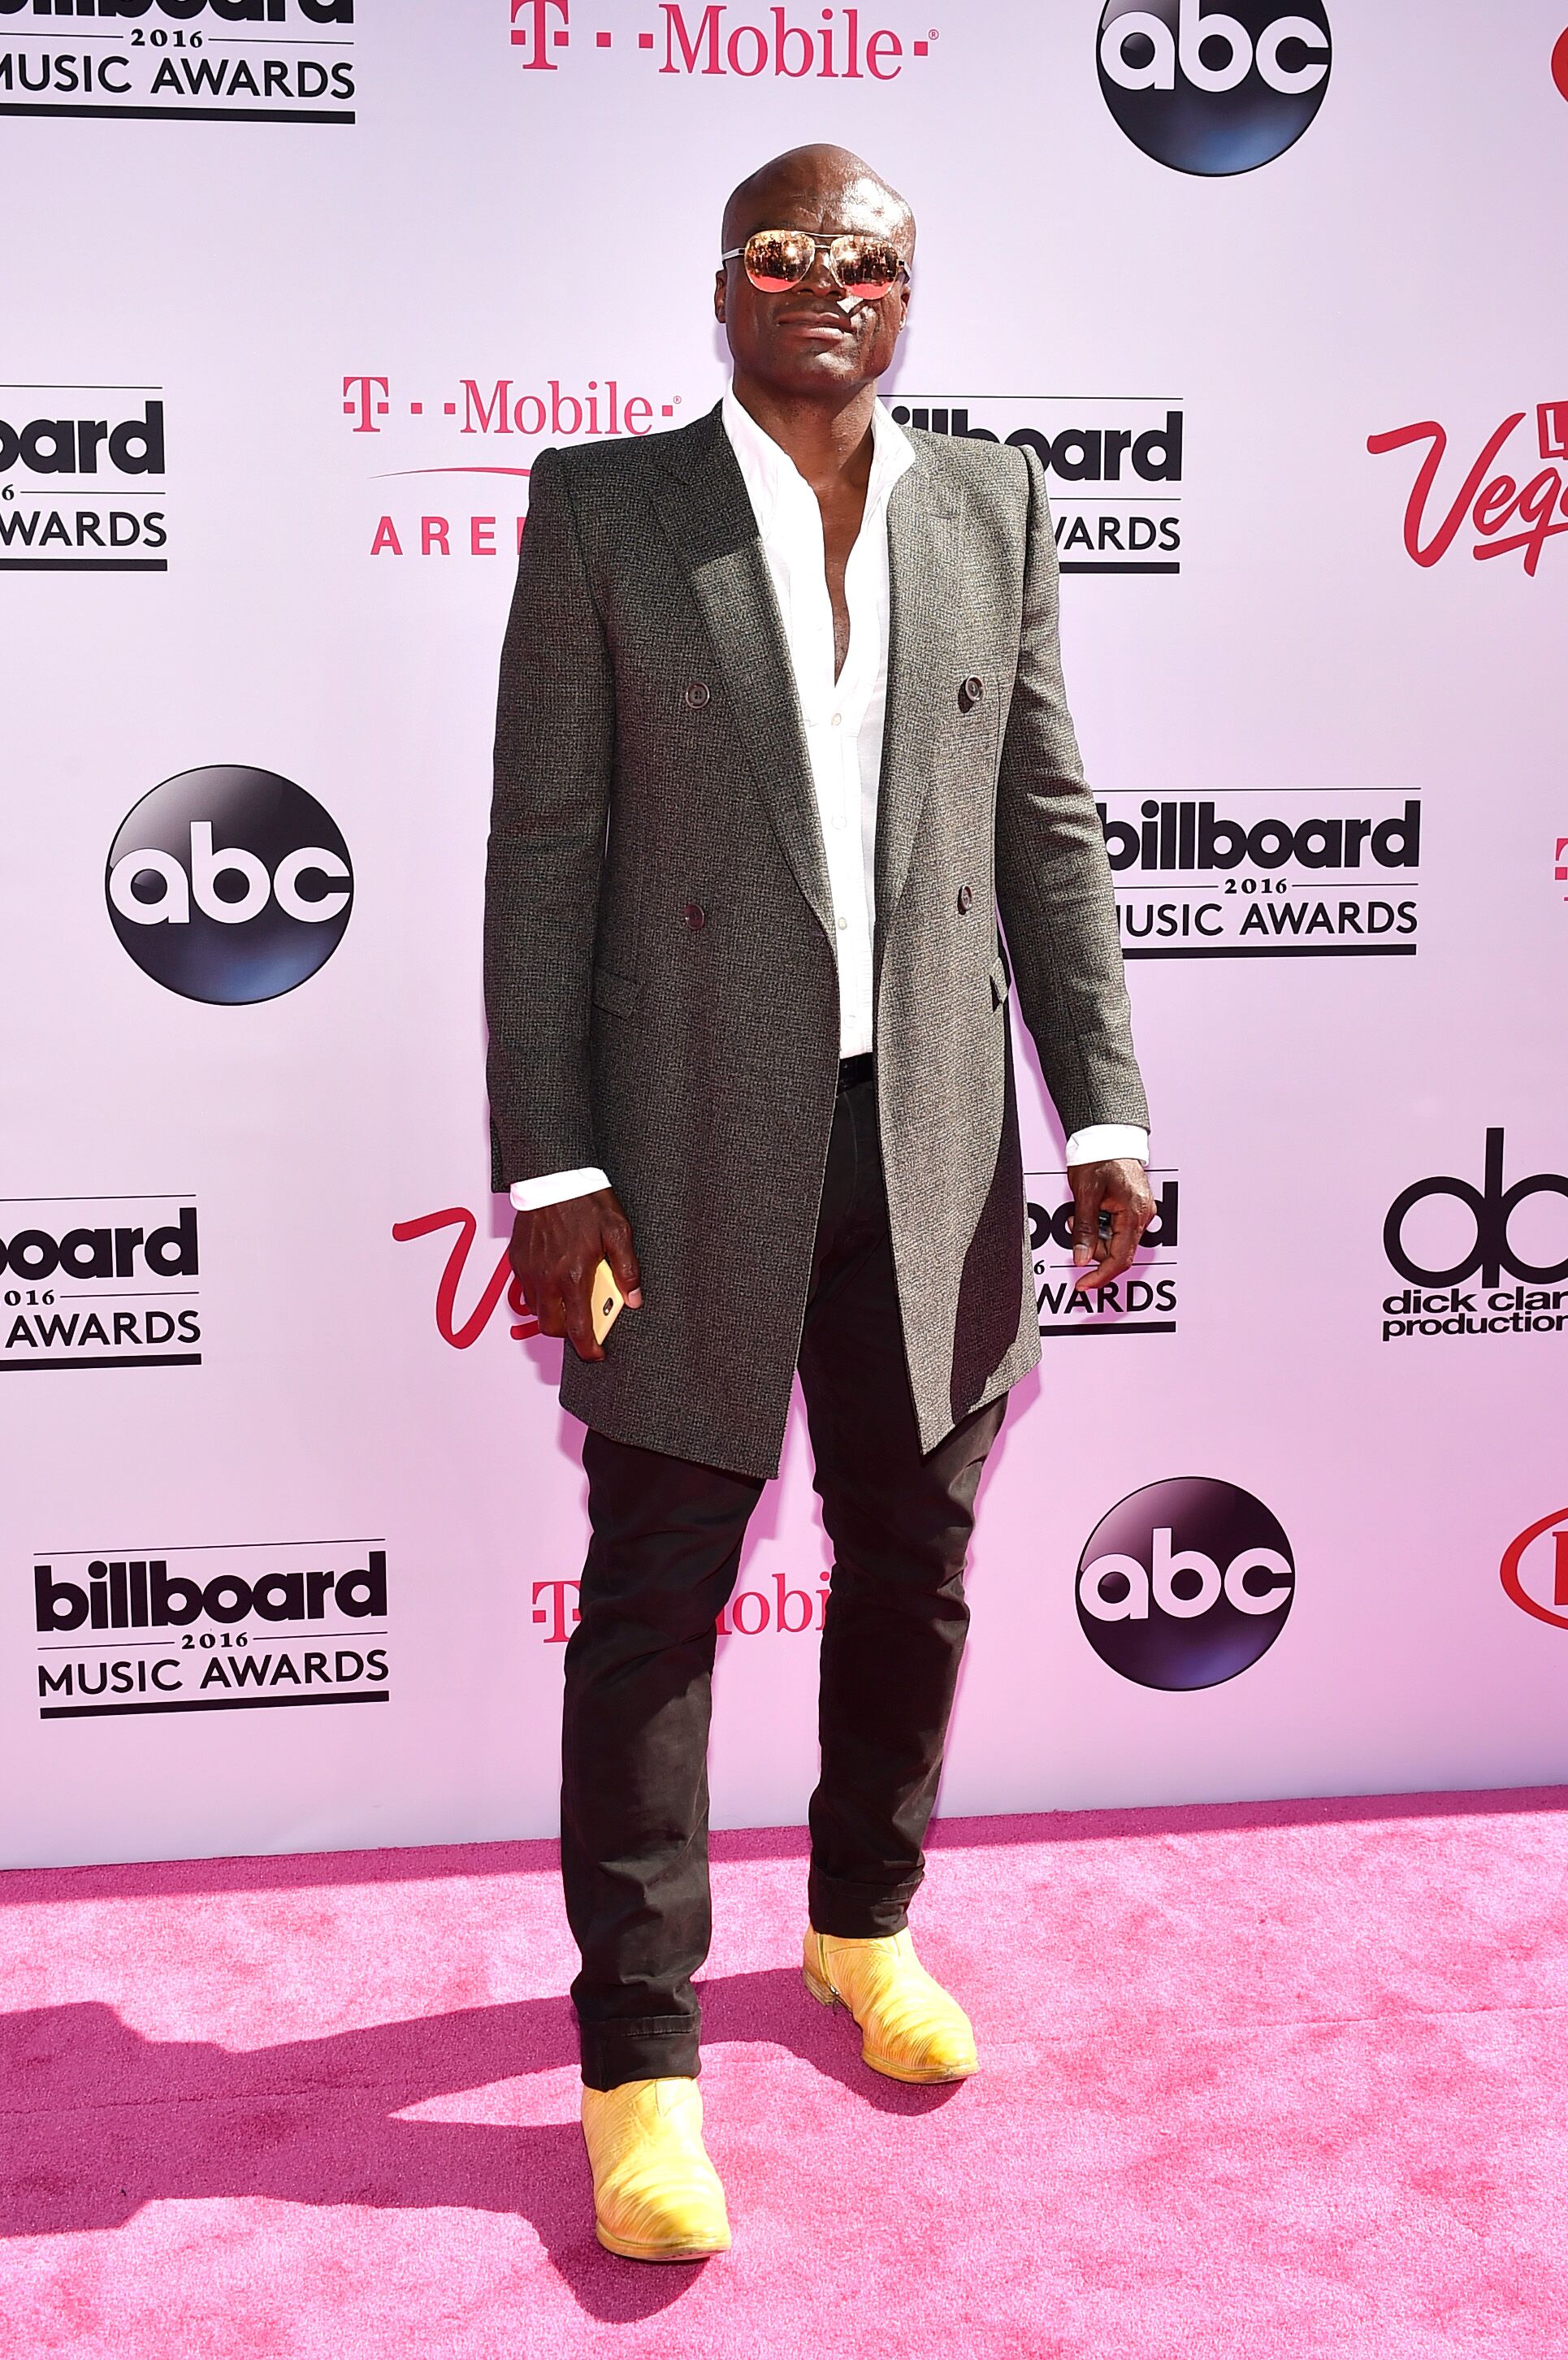 Seal attends the Billboard Music Awards 2016 | Source: Getty Images/GlobalImagesUkraine